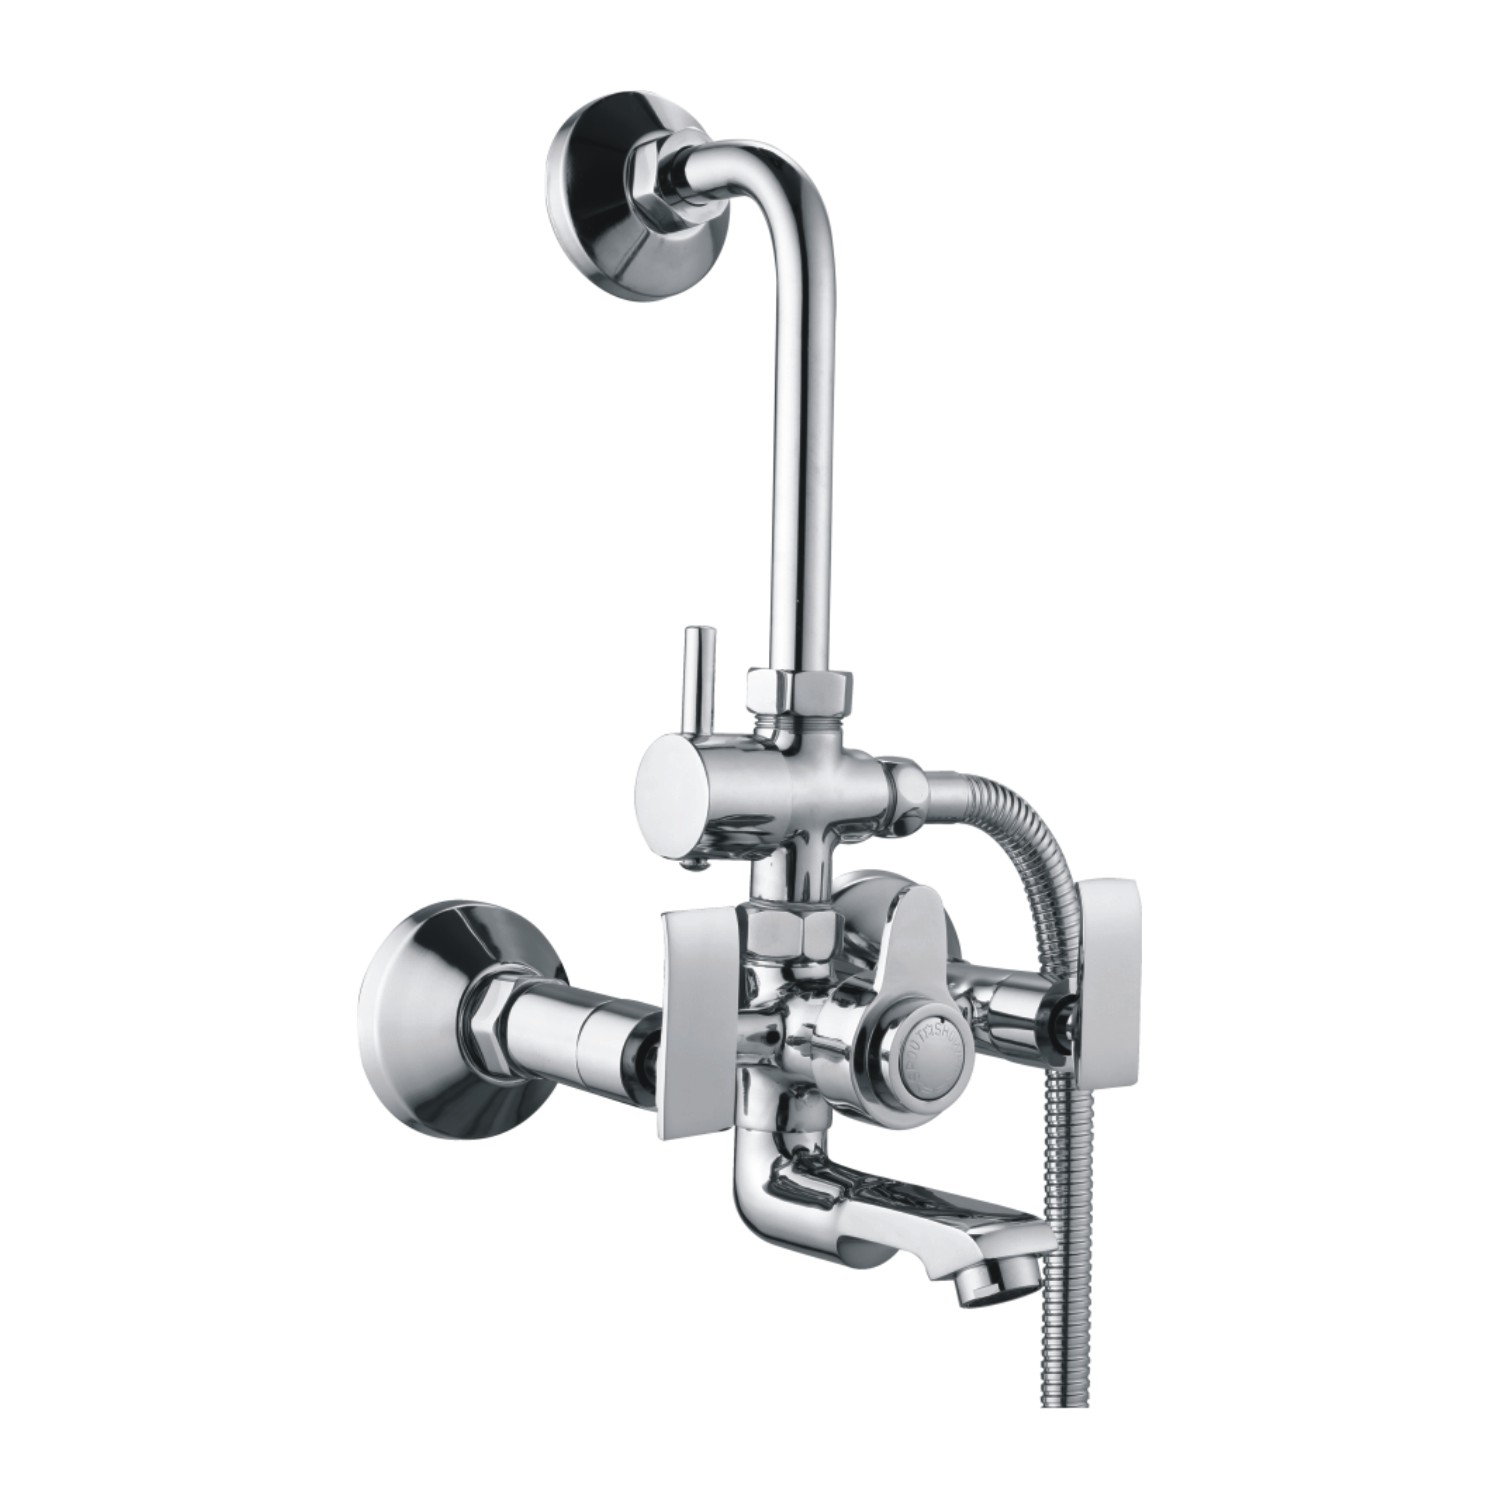 C.P WALL MIXER 3 IN 1 SYSTEM WITH BEND SET TELEPHONIC SHOWER & 1.5 MTR. TUBE WITH STAND